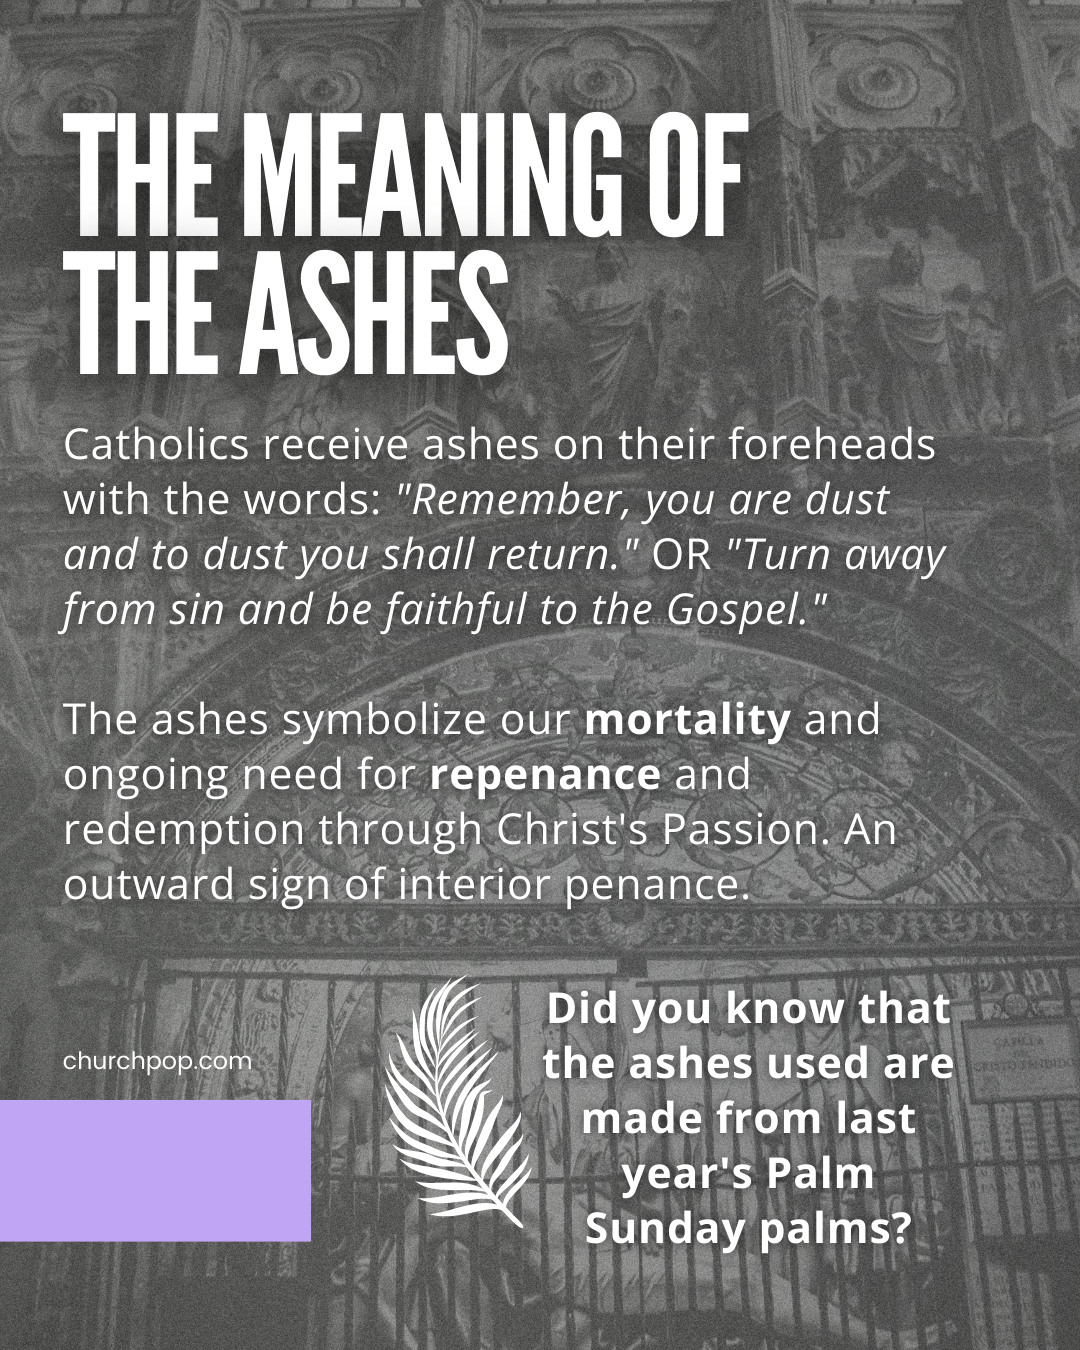  ash wednesday meaning, ash wednesday what is it, ash wednesday definition, ash wednesday is when